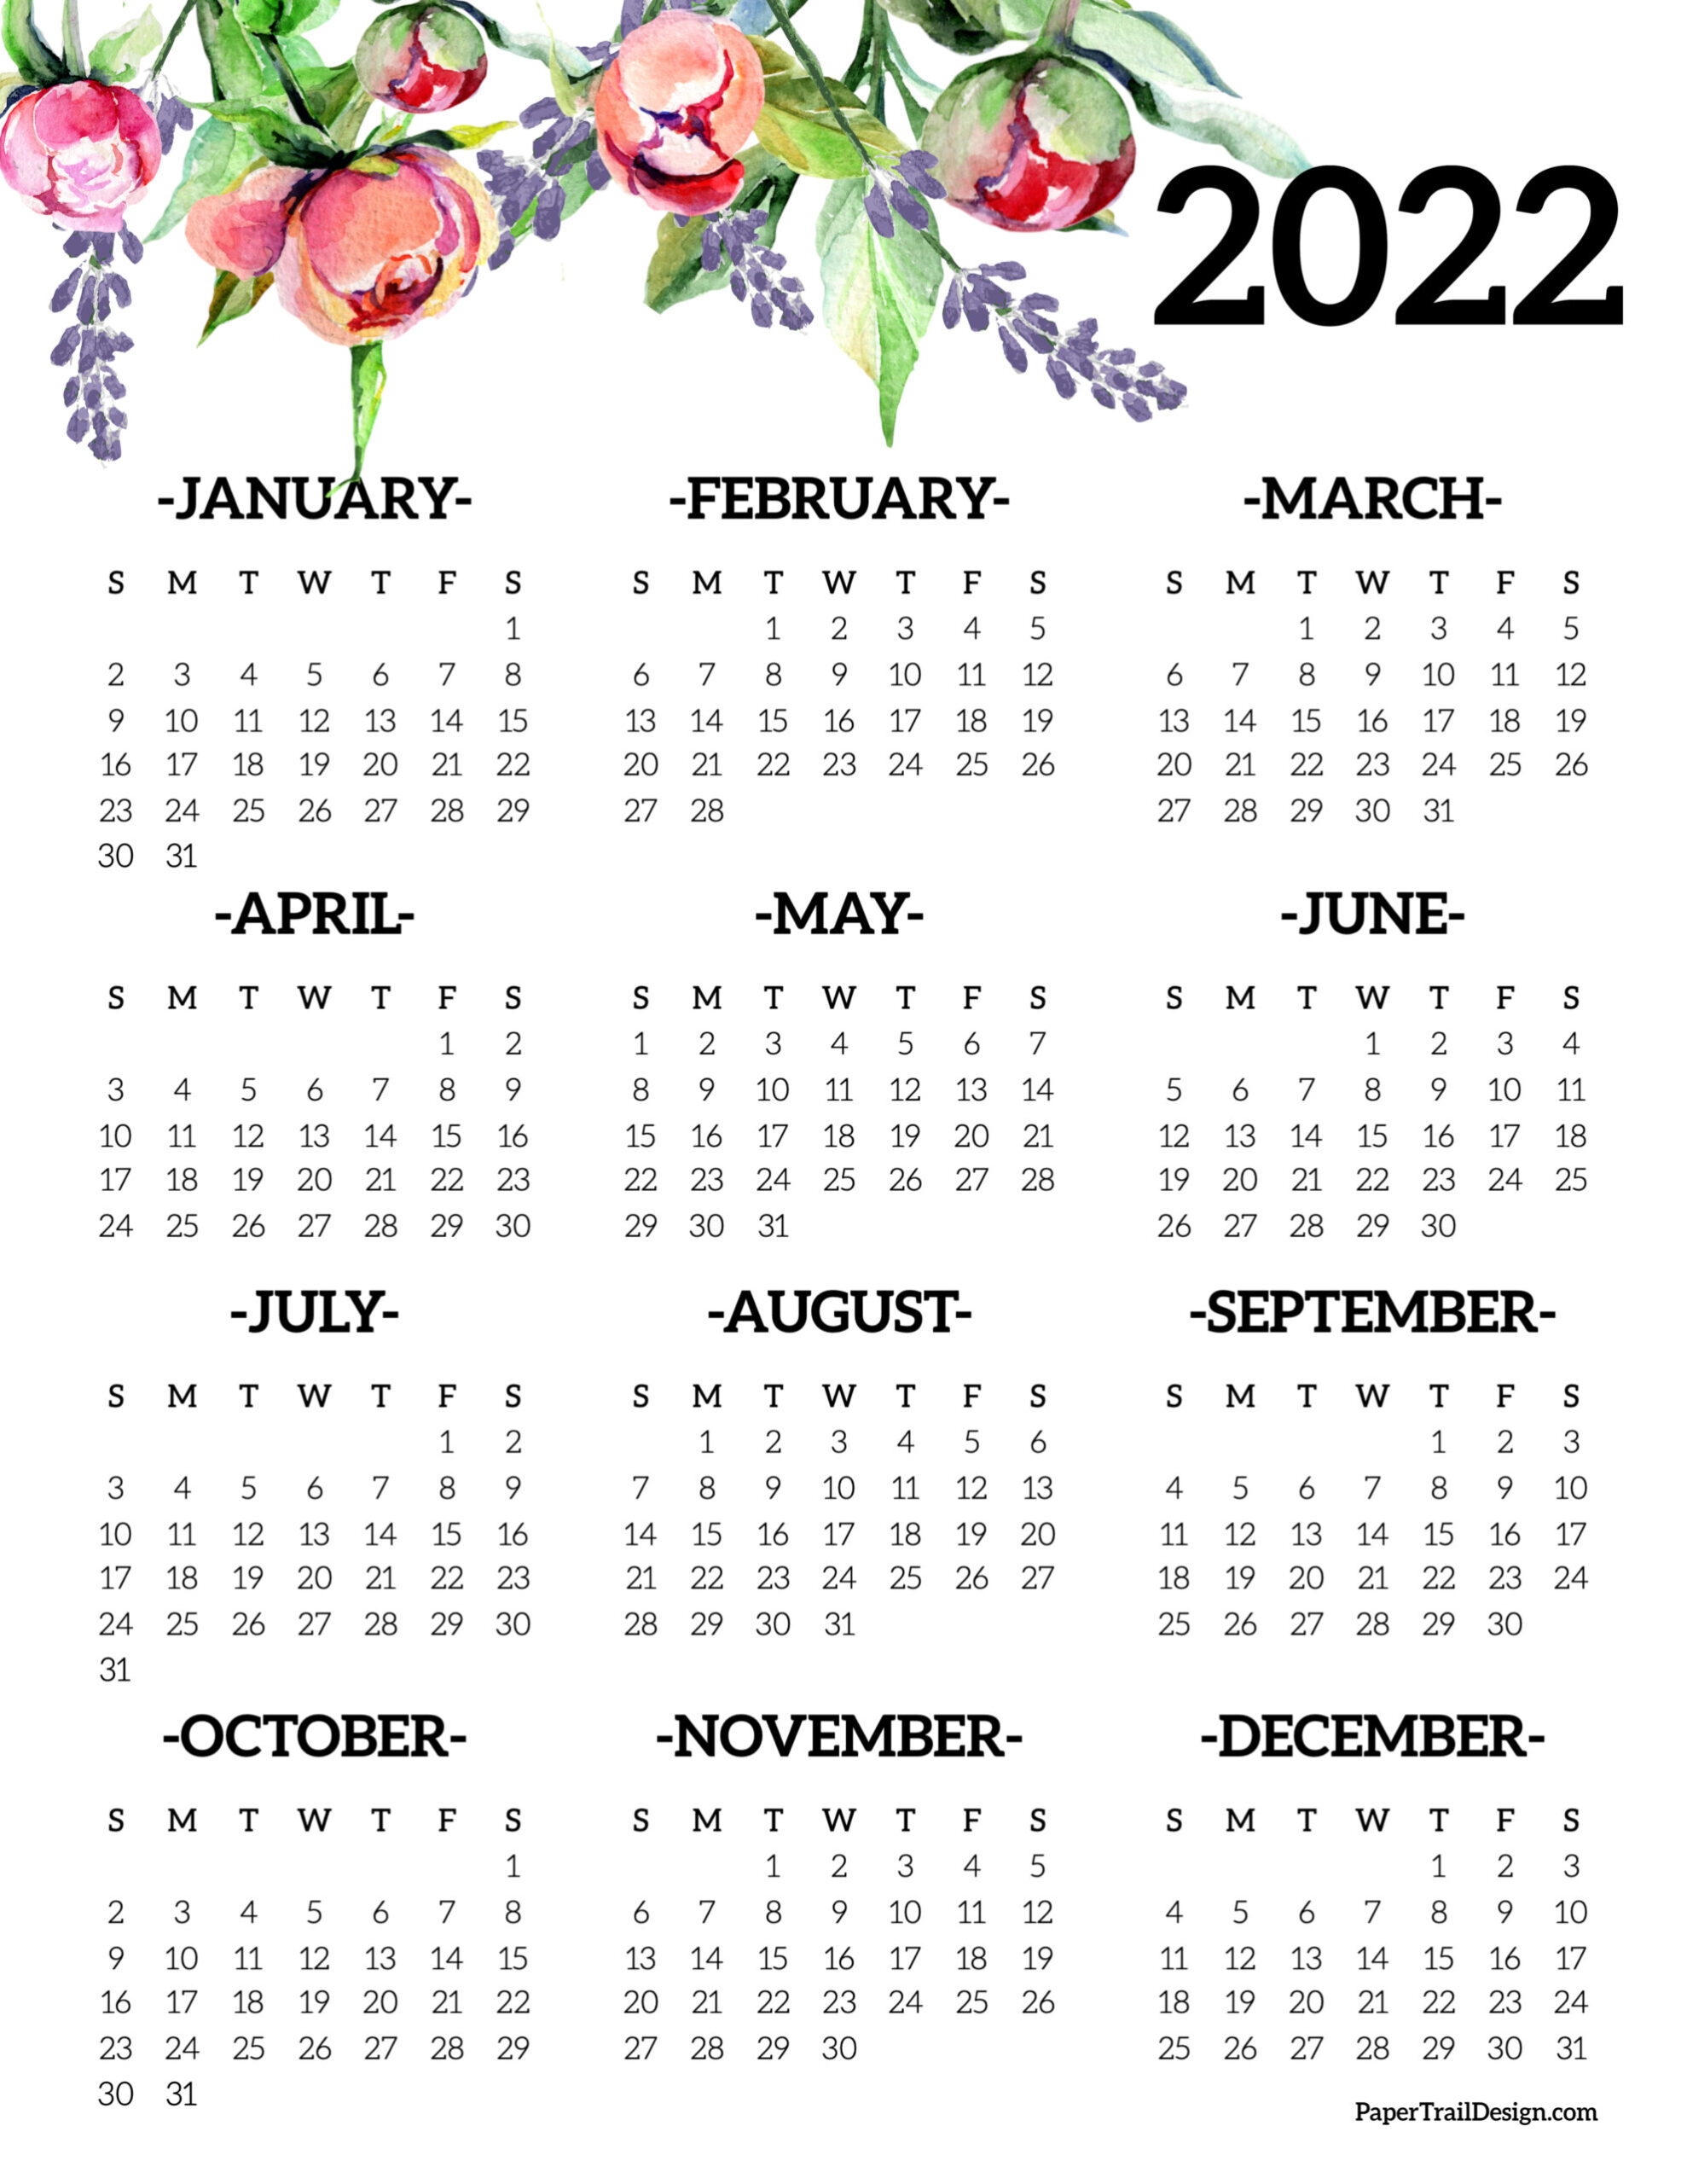 Calendar 2022 Printable One Page - Paper Trail Design